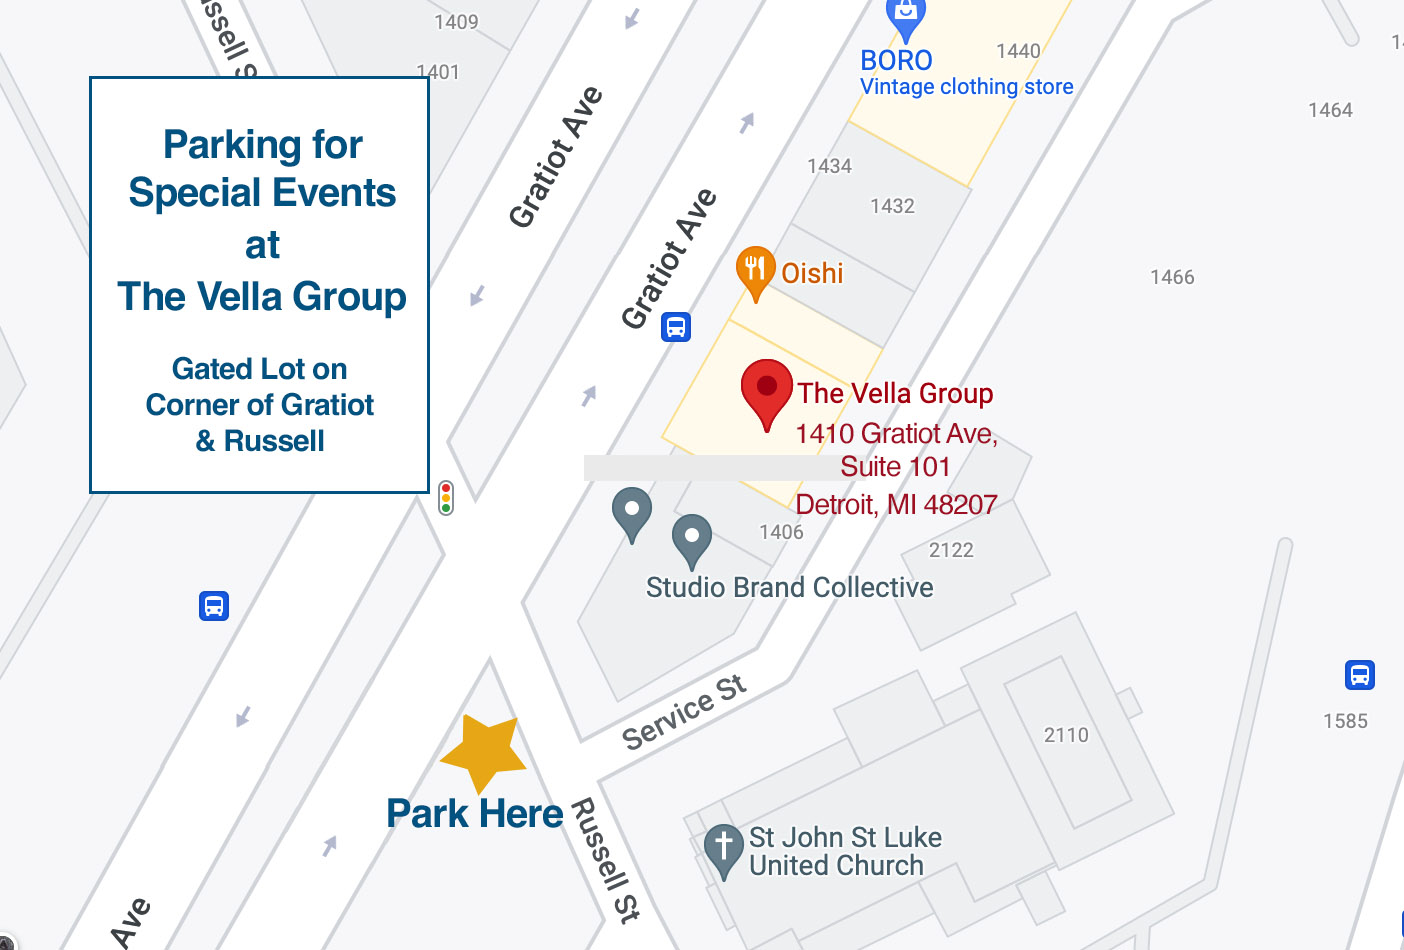 Parking map for special events at The Vella Group office 1410 Gratiot, Detroit